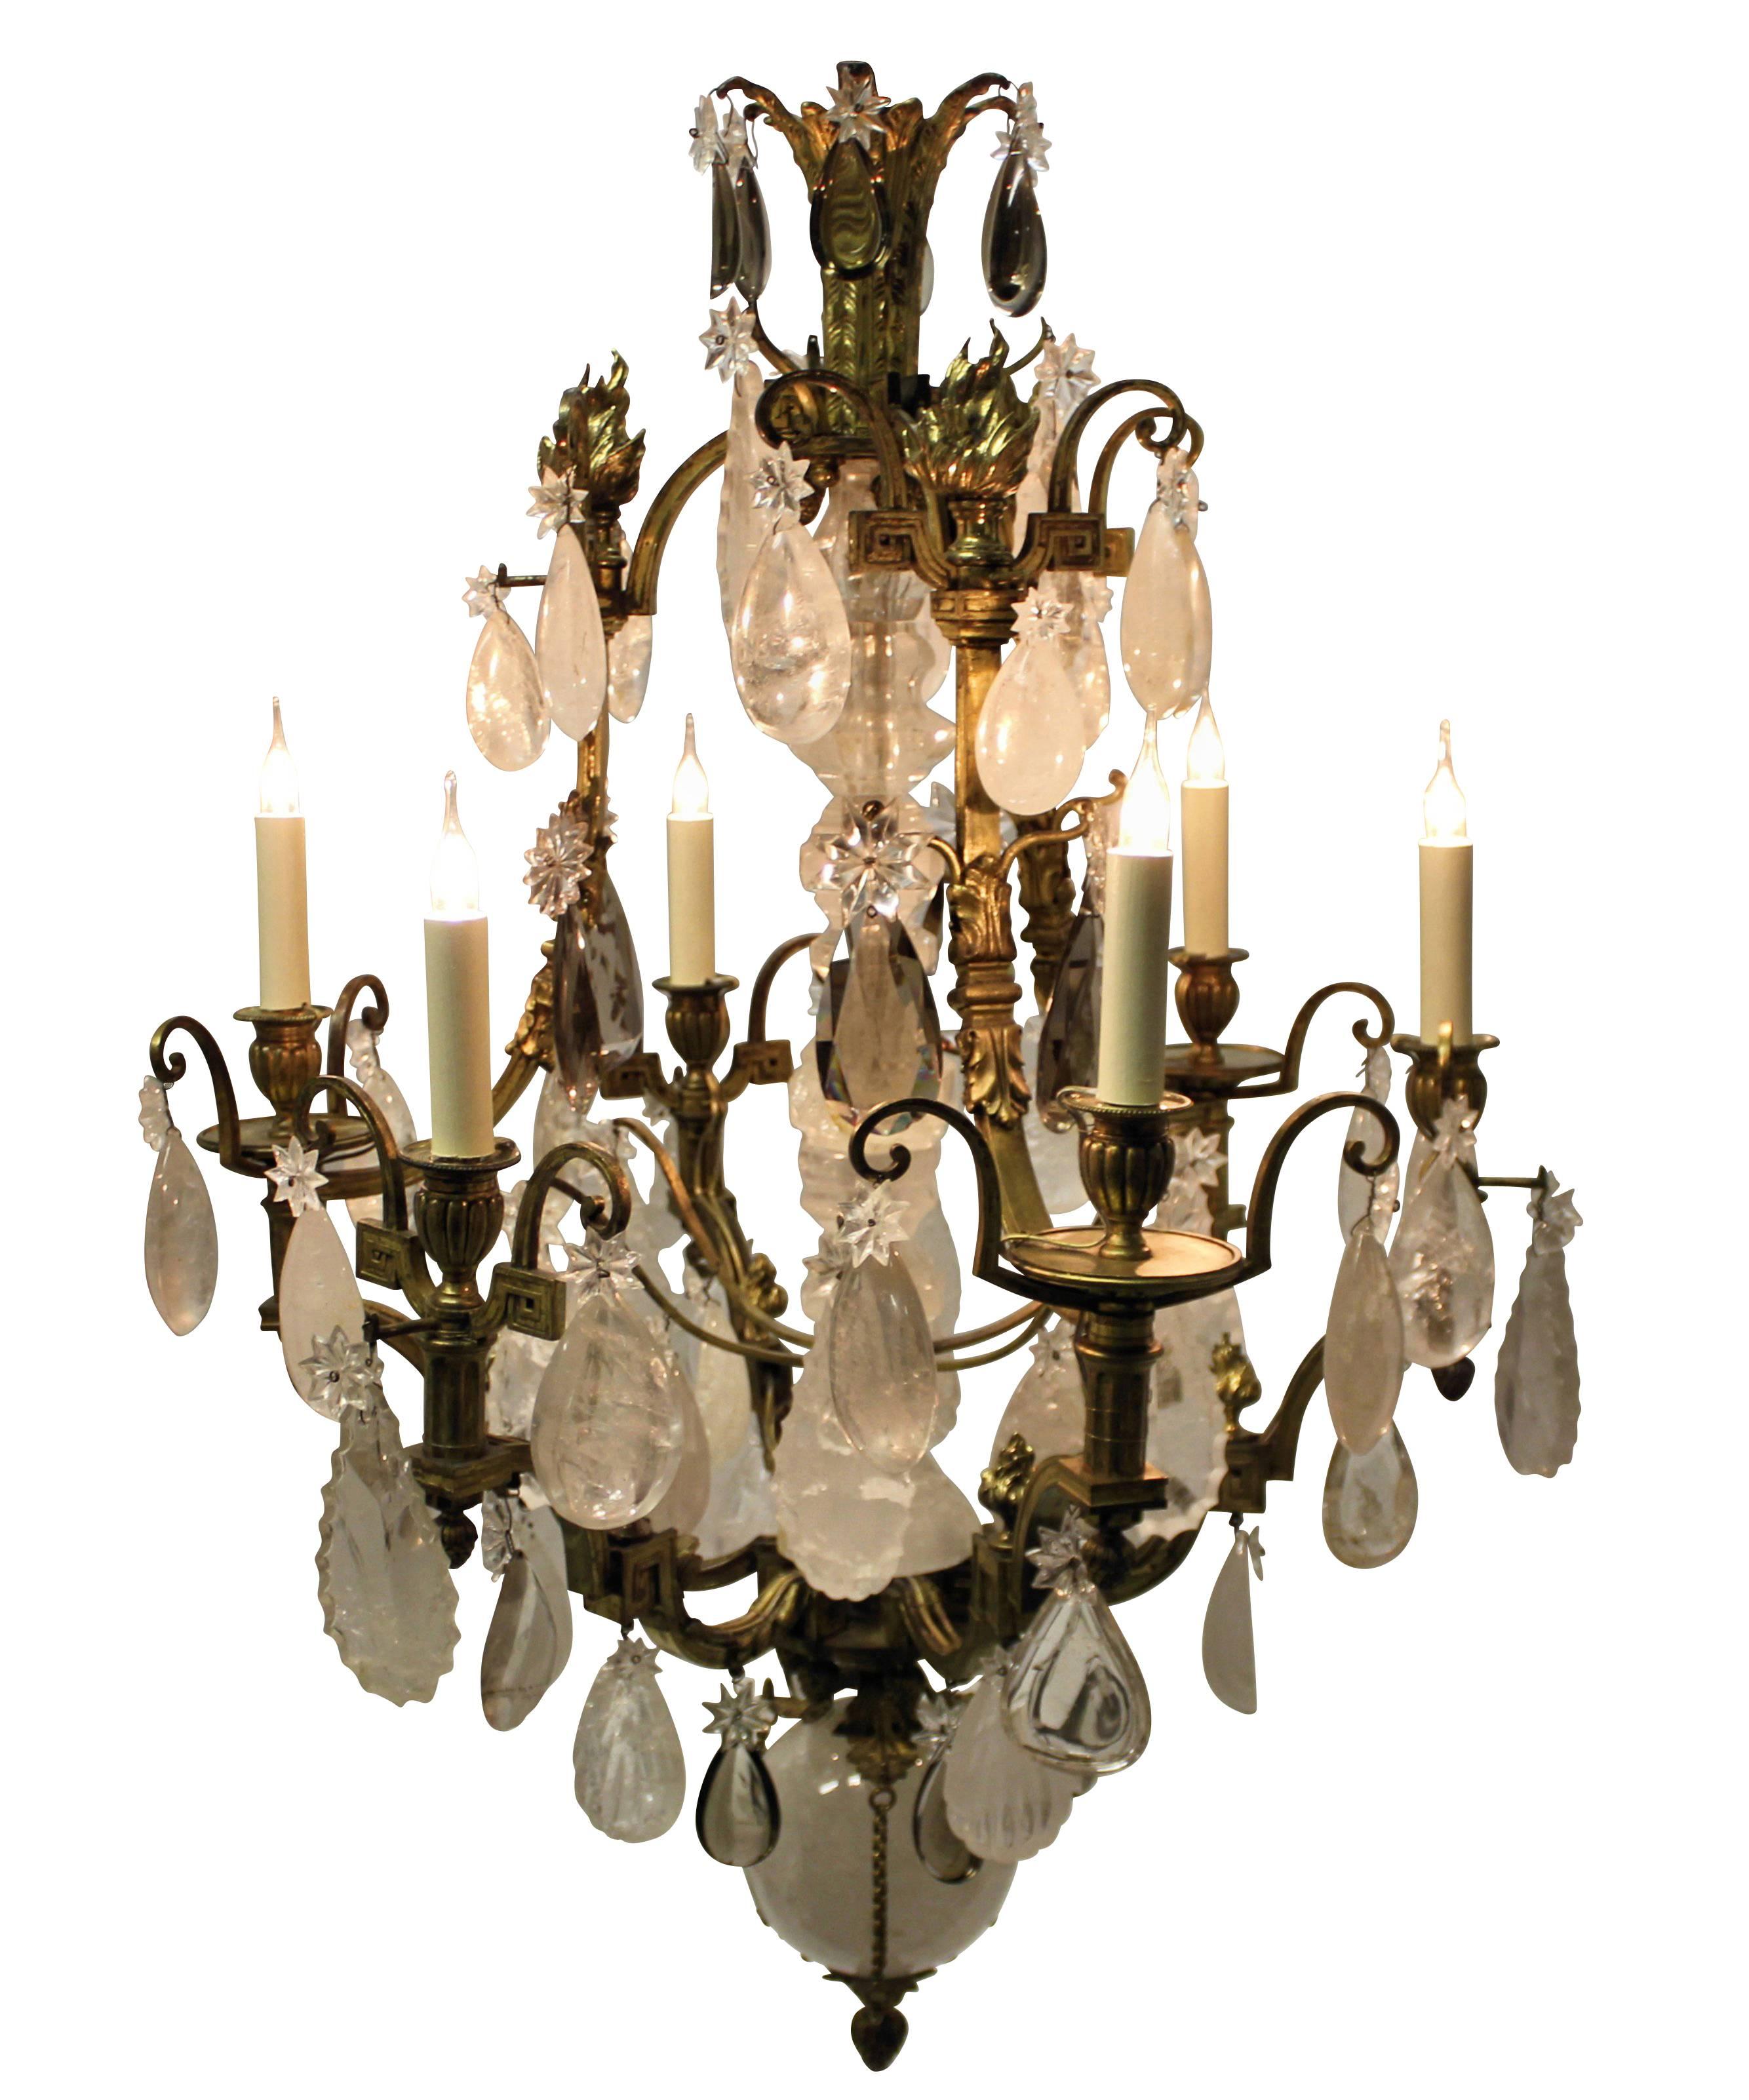 A fine Russian neoclassical gilt bronze and cristal de roche chandelier with smoked quartz. Made in Paris for Saint Petersburg.

Measures: The ball has a diameter of 18cm and the largest plaque is 18 cm.